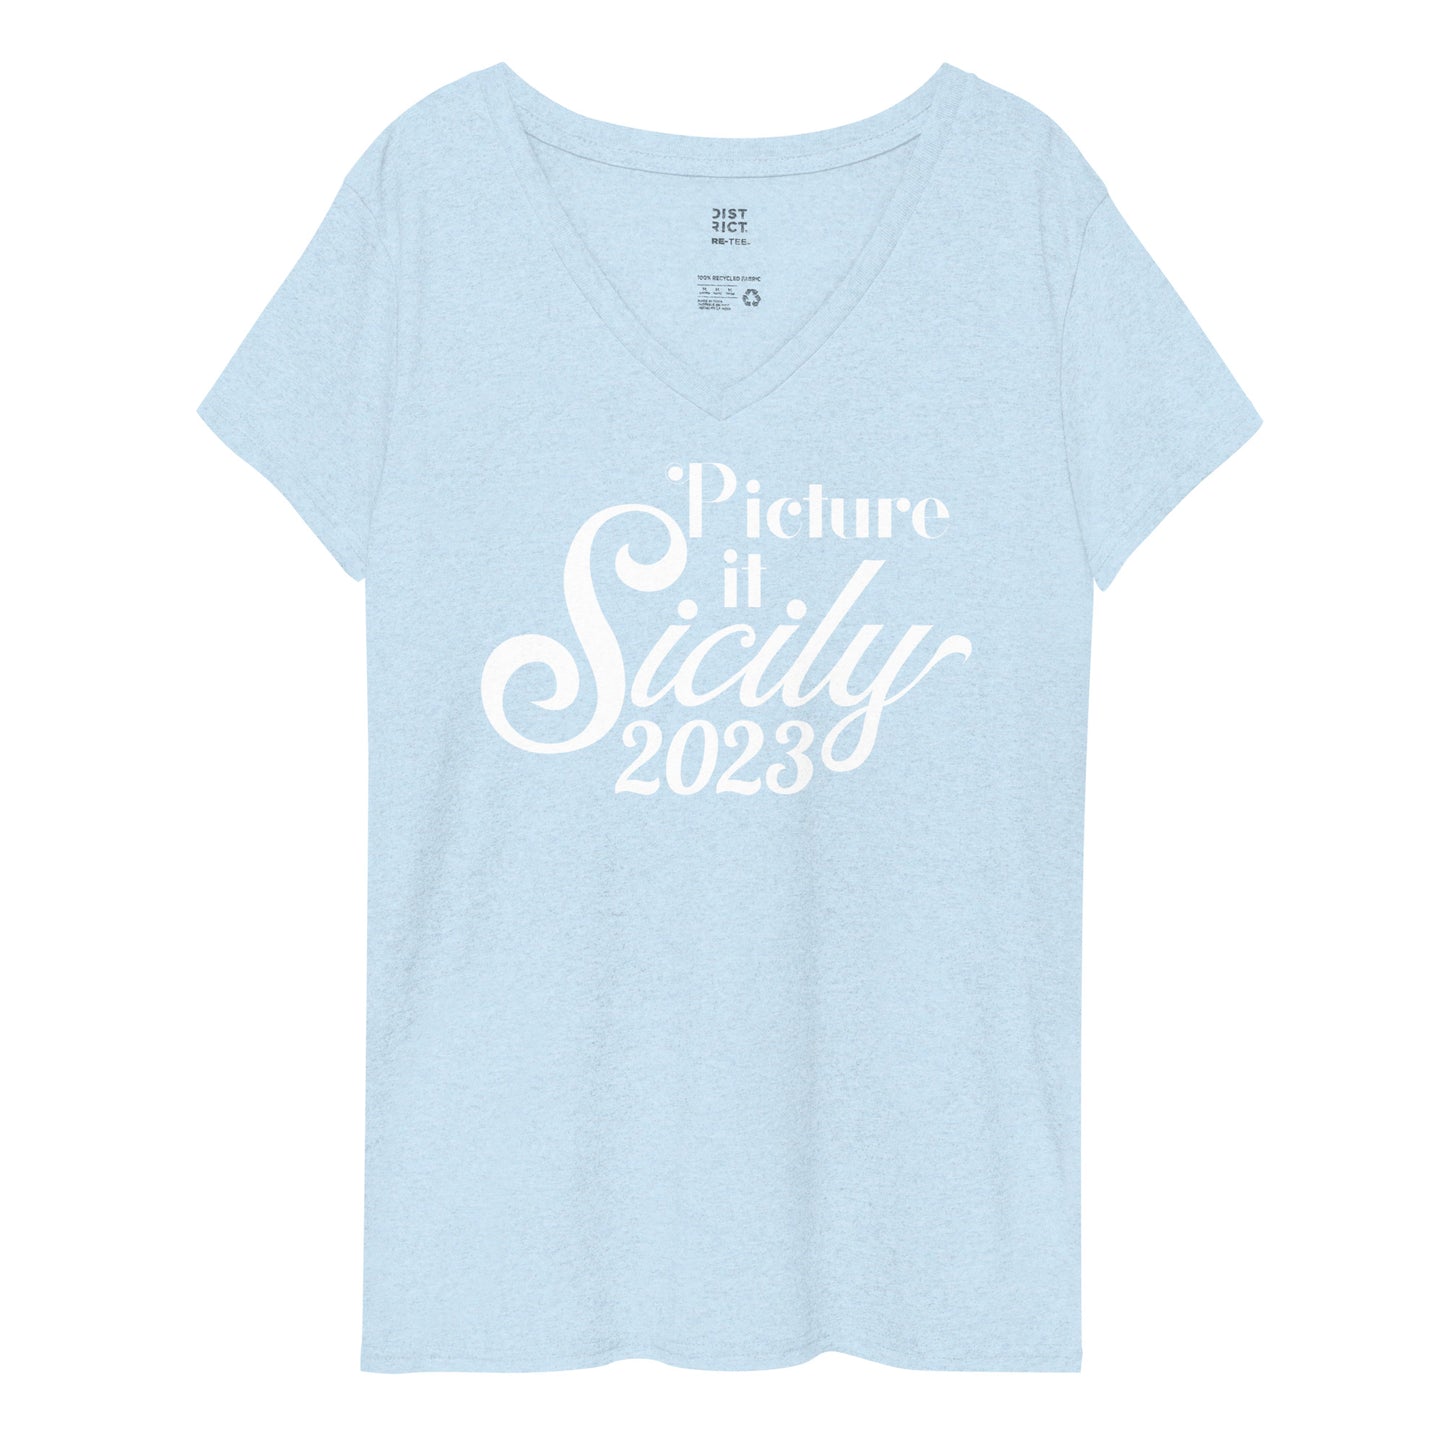 Picture It. Sicily, 2023 -  Women’s V-Neck Cruise T-Shirt